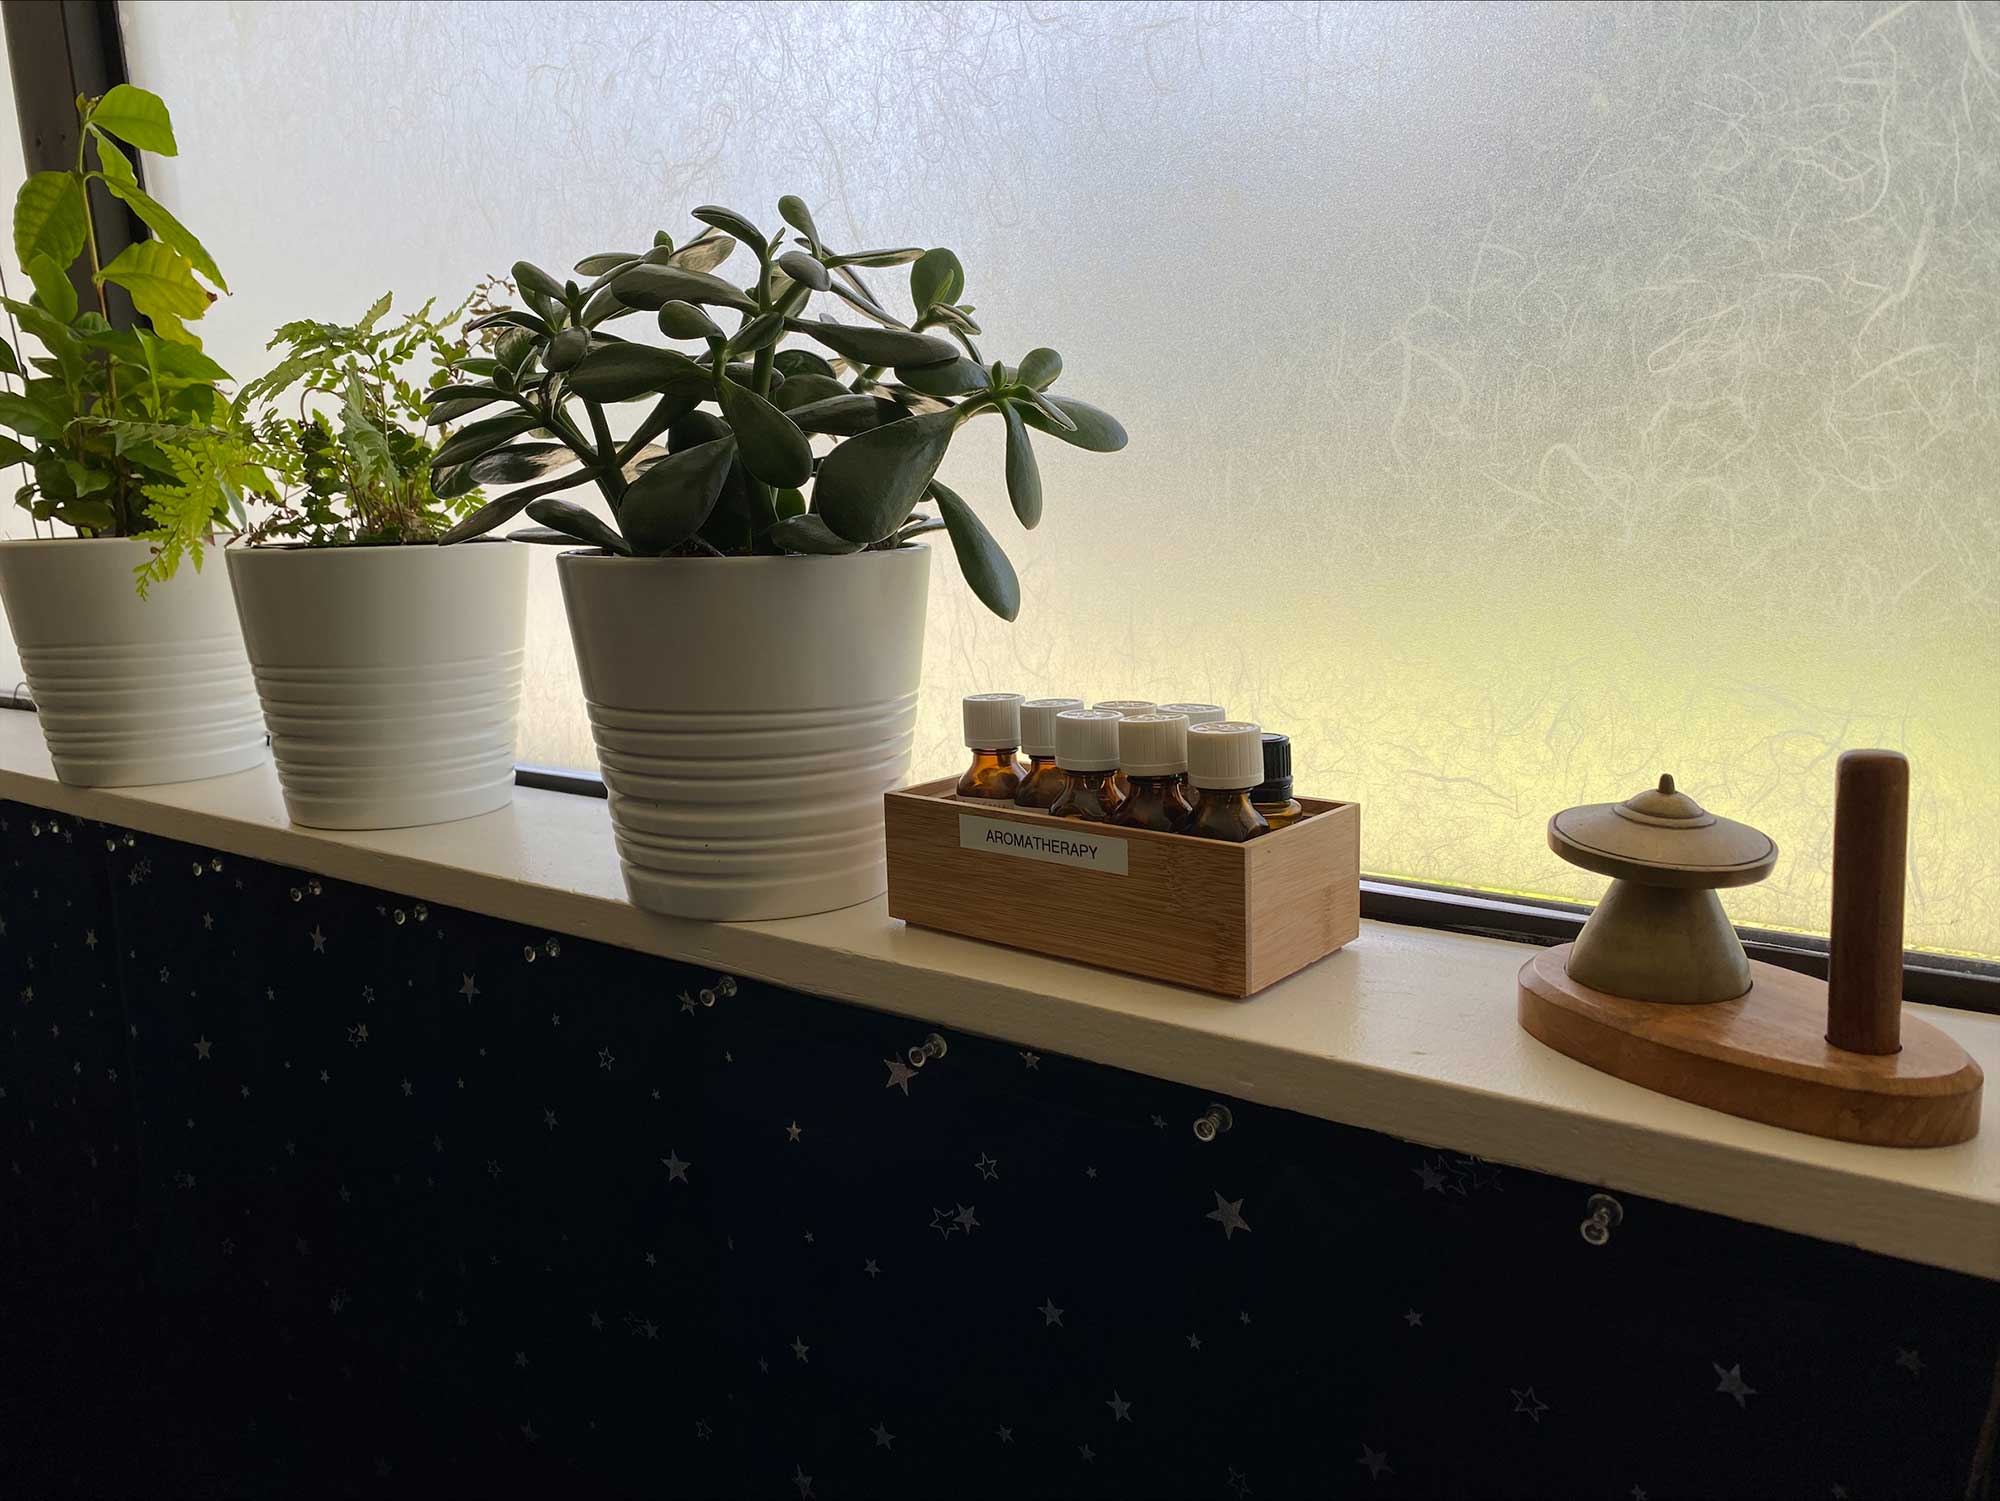 A row of plants, a box filled with essential oils, and a tabletop chime displayed on a window sill.